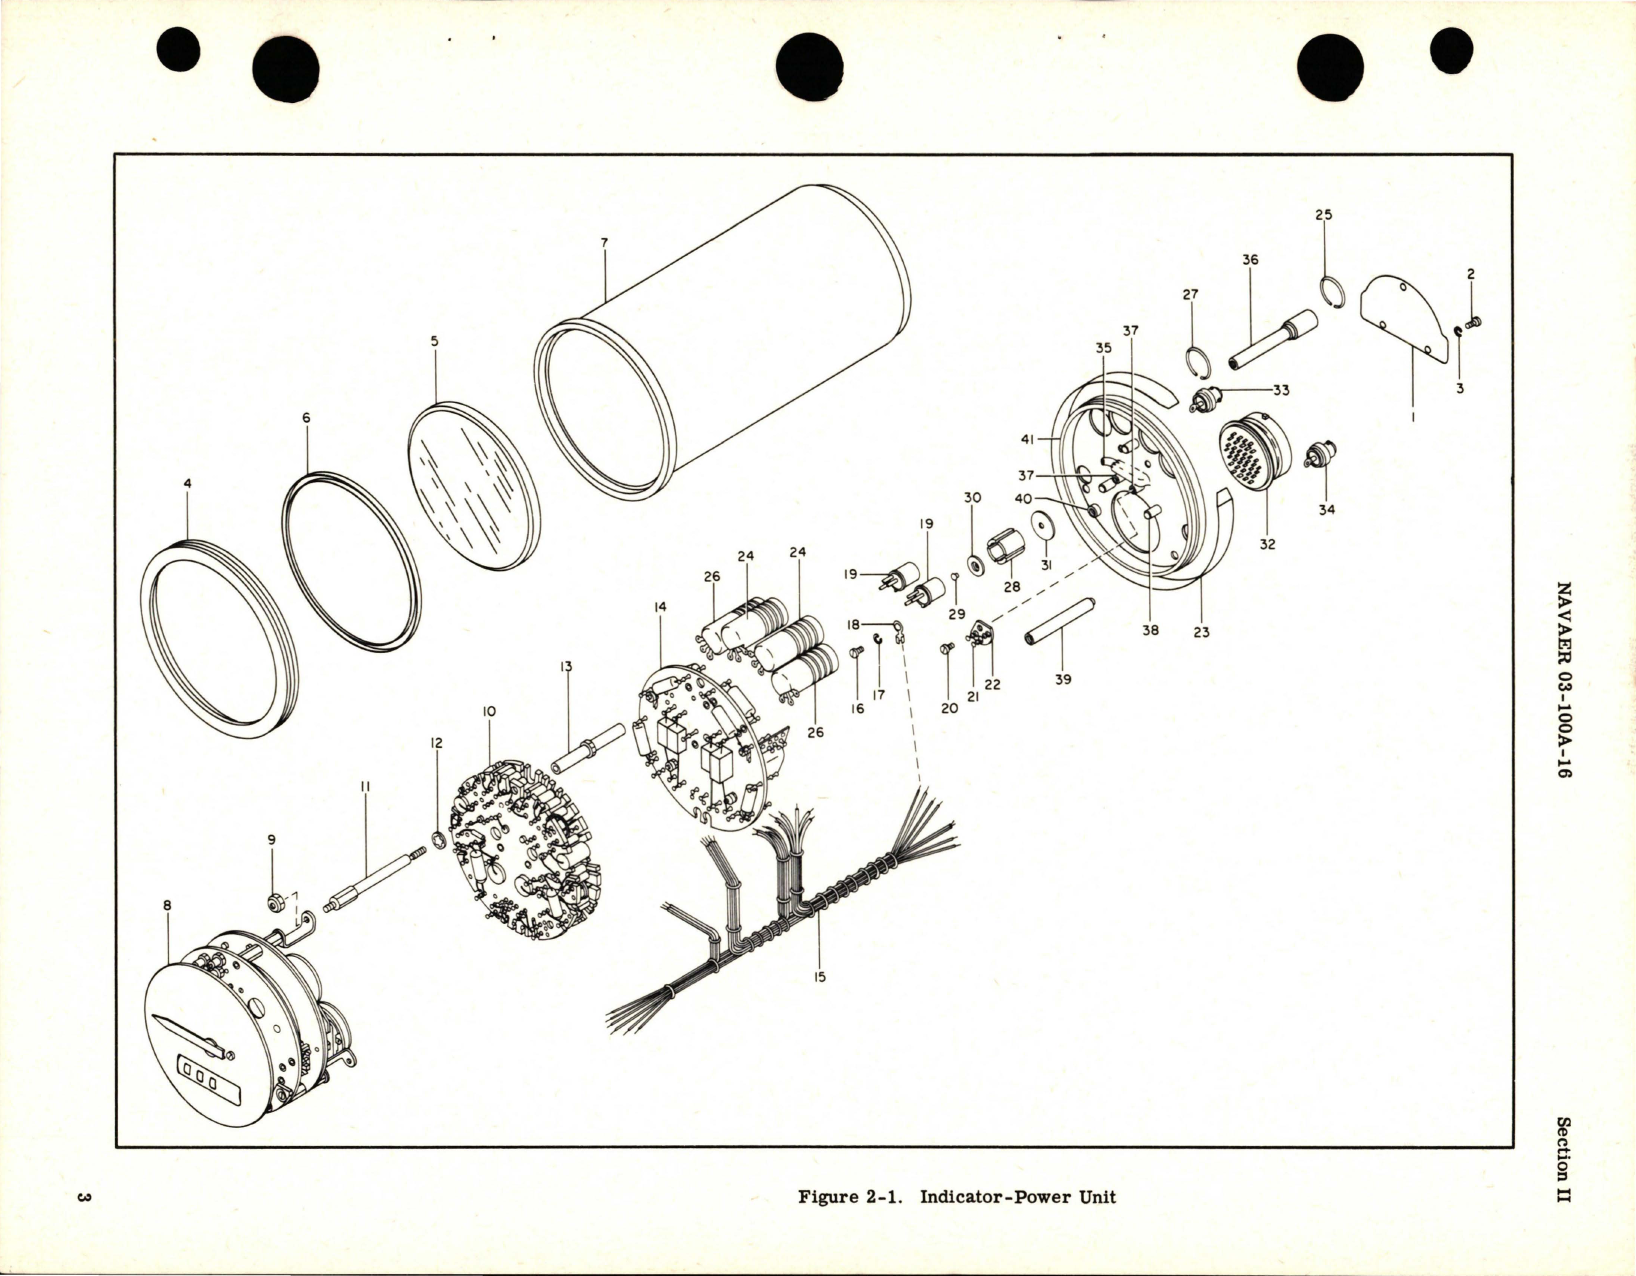 Sample page 5 from AirCorps Library document: Overhaul Instructions for Indicator Power Unit - Part EA932C-3 